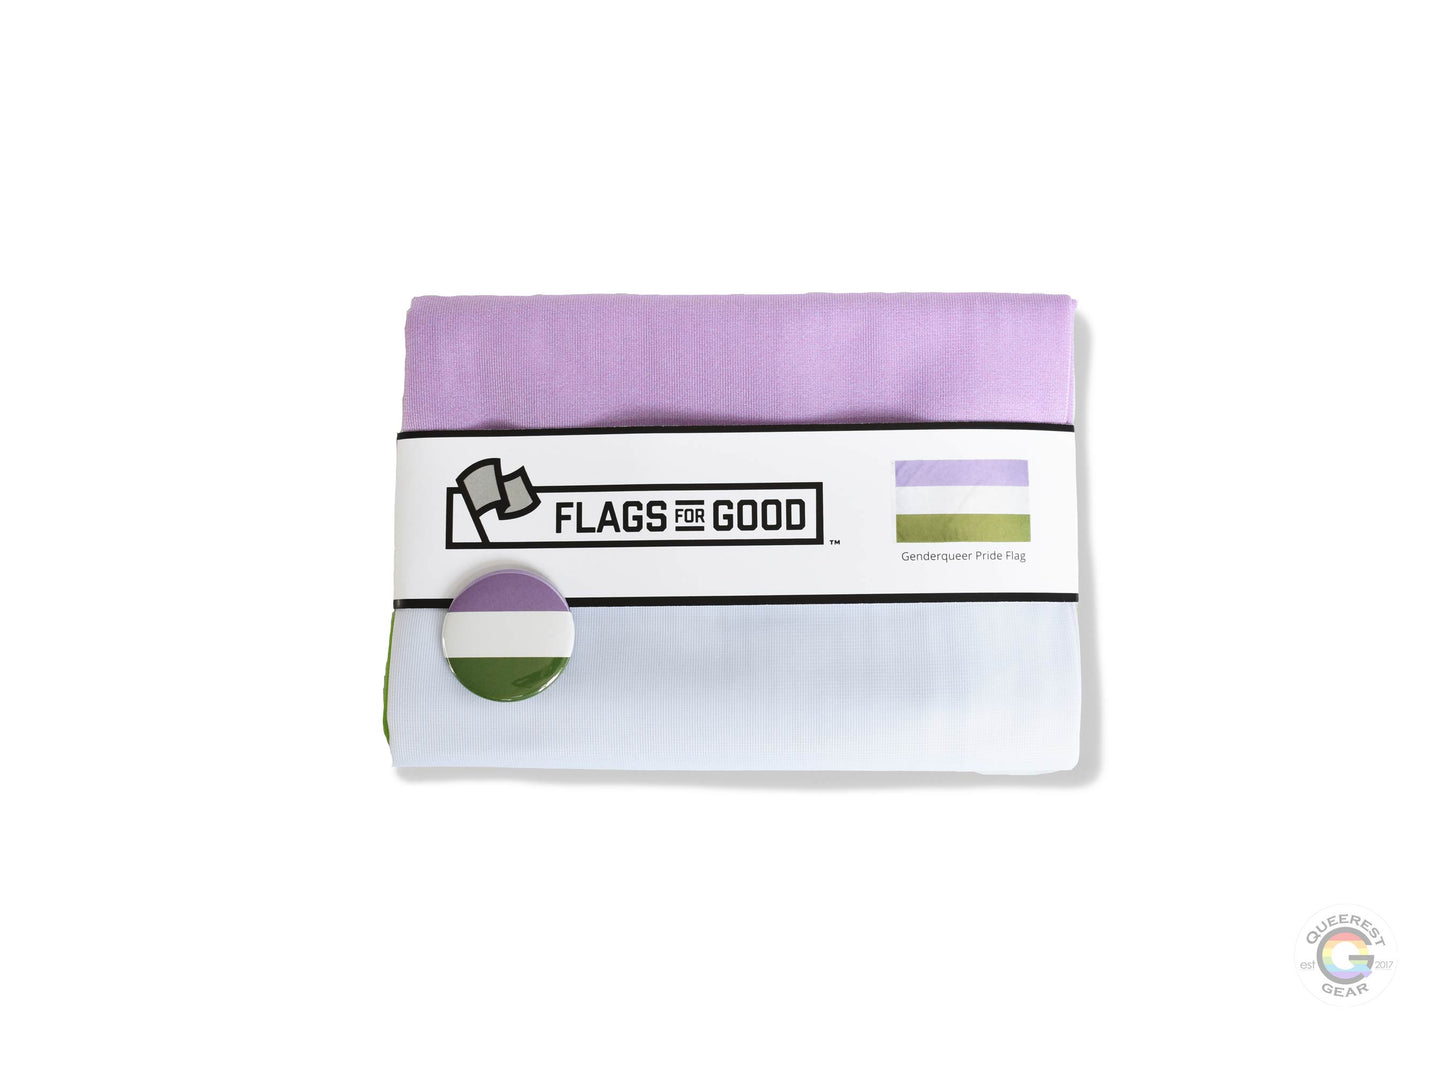 The genderqueer pride flag folded in its packaging with the matching free genderqueer flag button